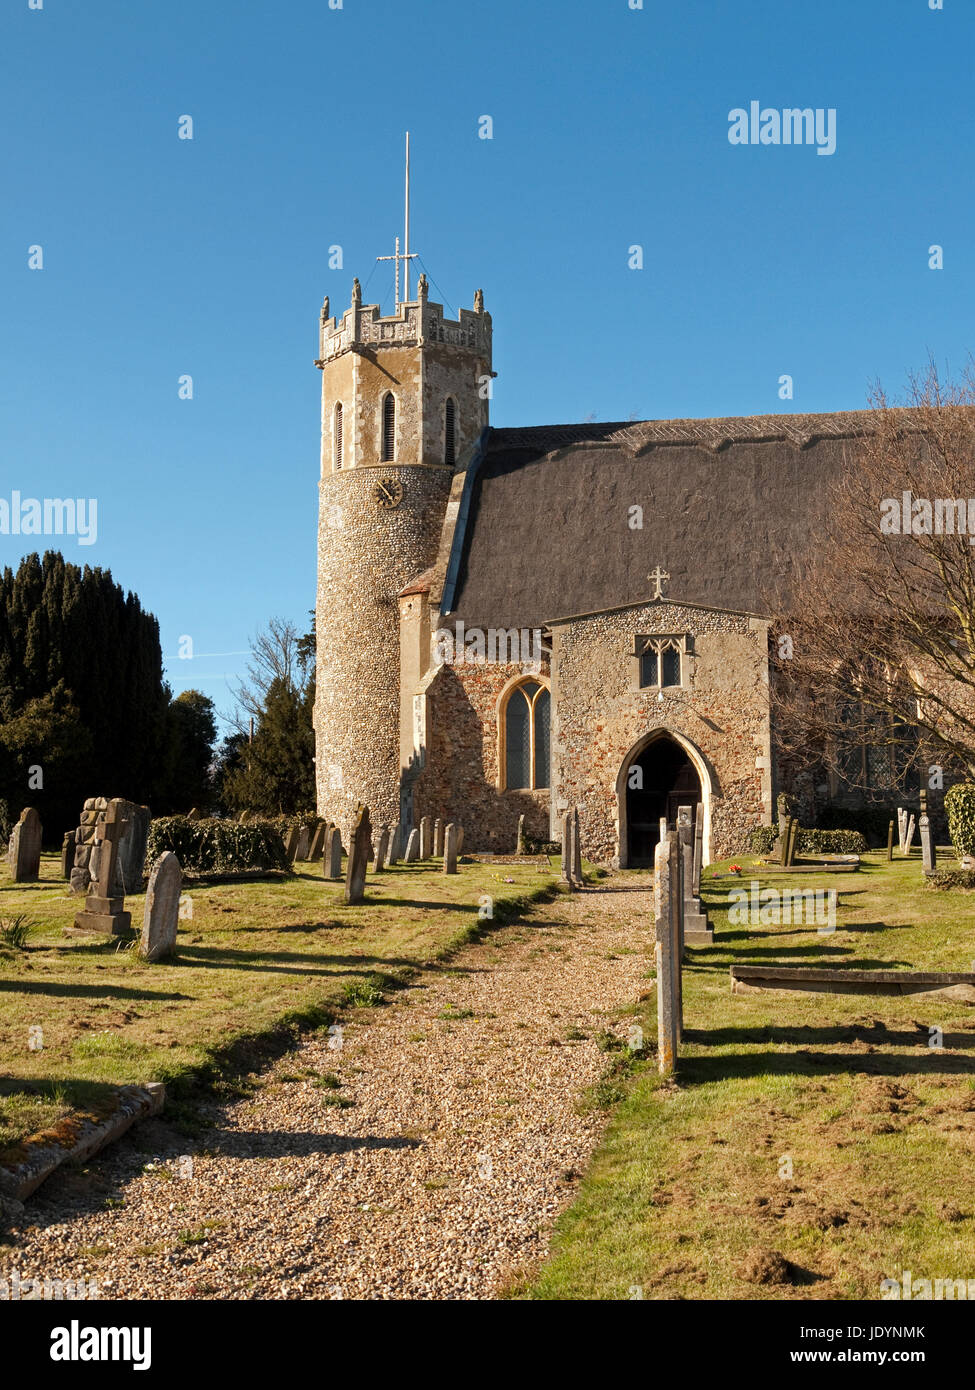 The Thatched Church of St Edmund with its Saxon Round Tower in Acle, Norfolk, England, UK Stock Photo